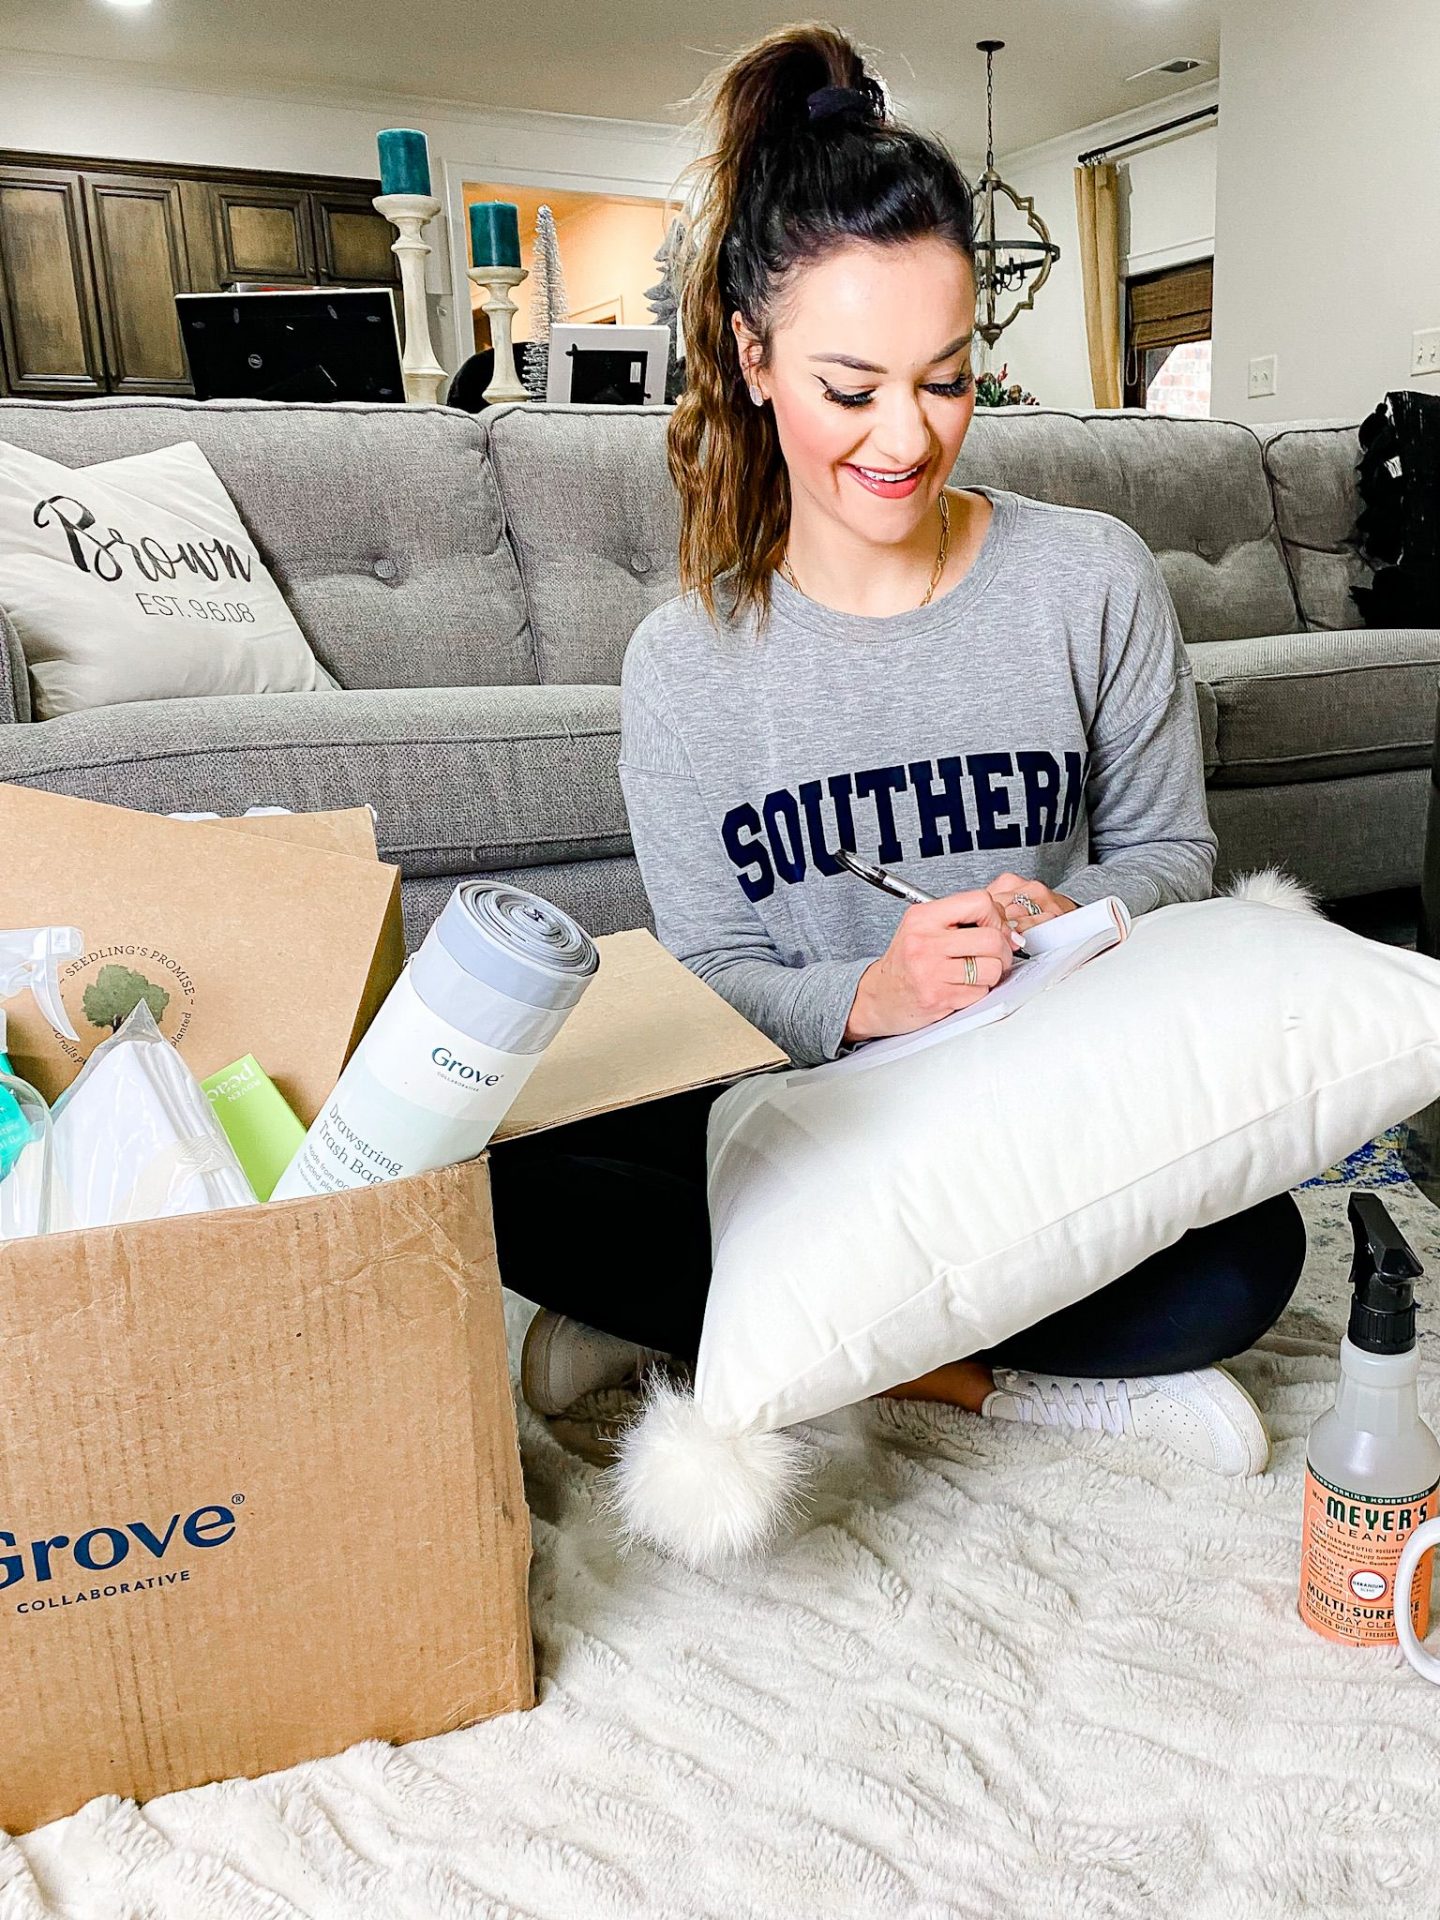 How To Keep Your Home Clean And Organized In 2021, by Alabama Health + Lifestyle blogger, Heather Brown // My Life Well Loved